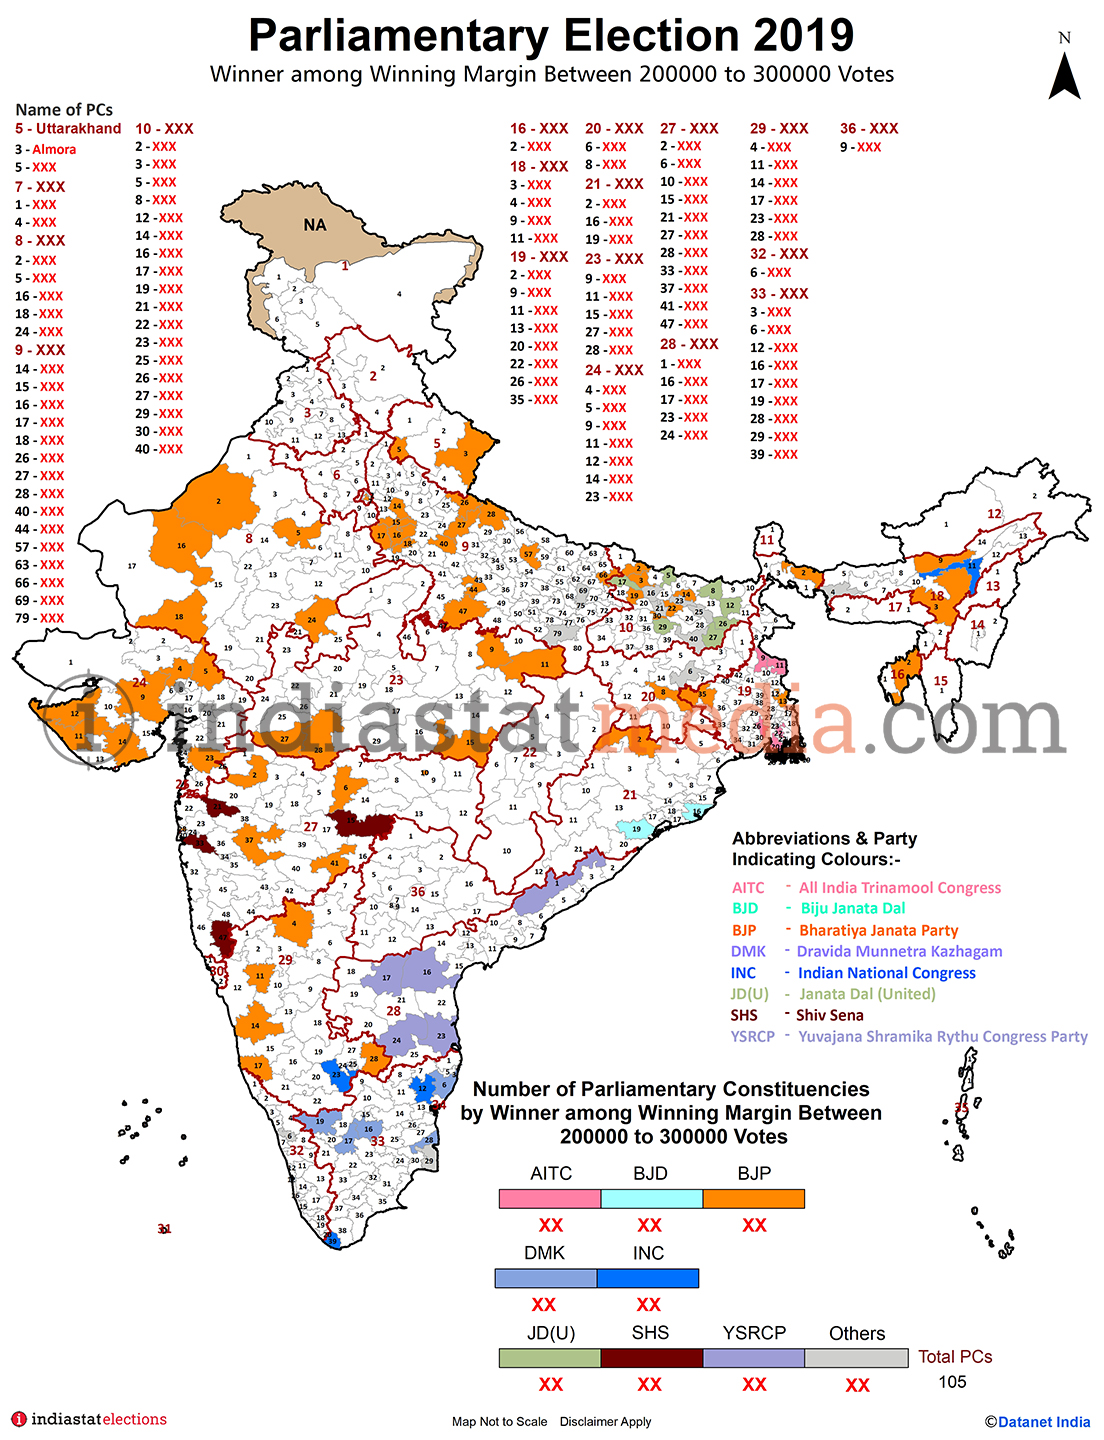 Winner among Winning Margin Between 200000 to 300000 Votes in India (Parliamentary Election - 2019)